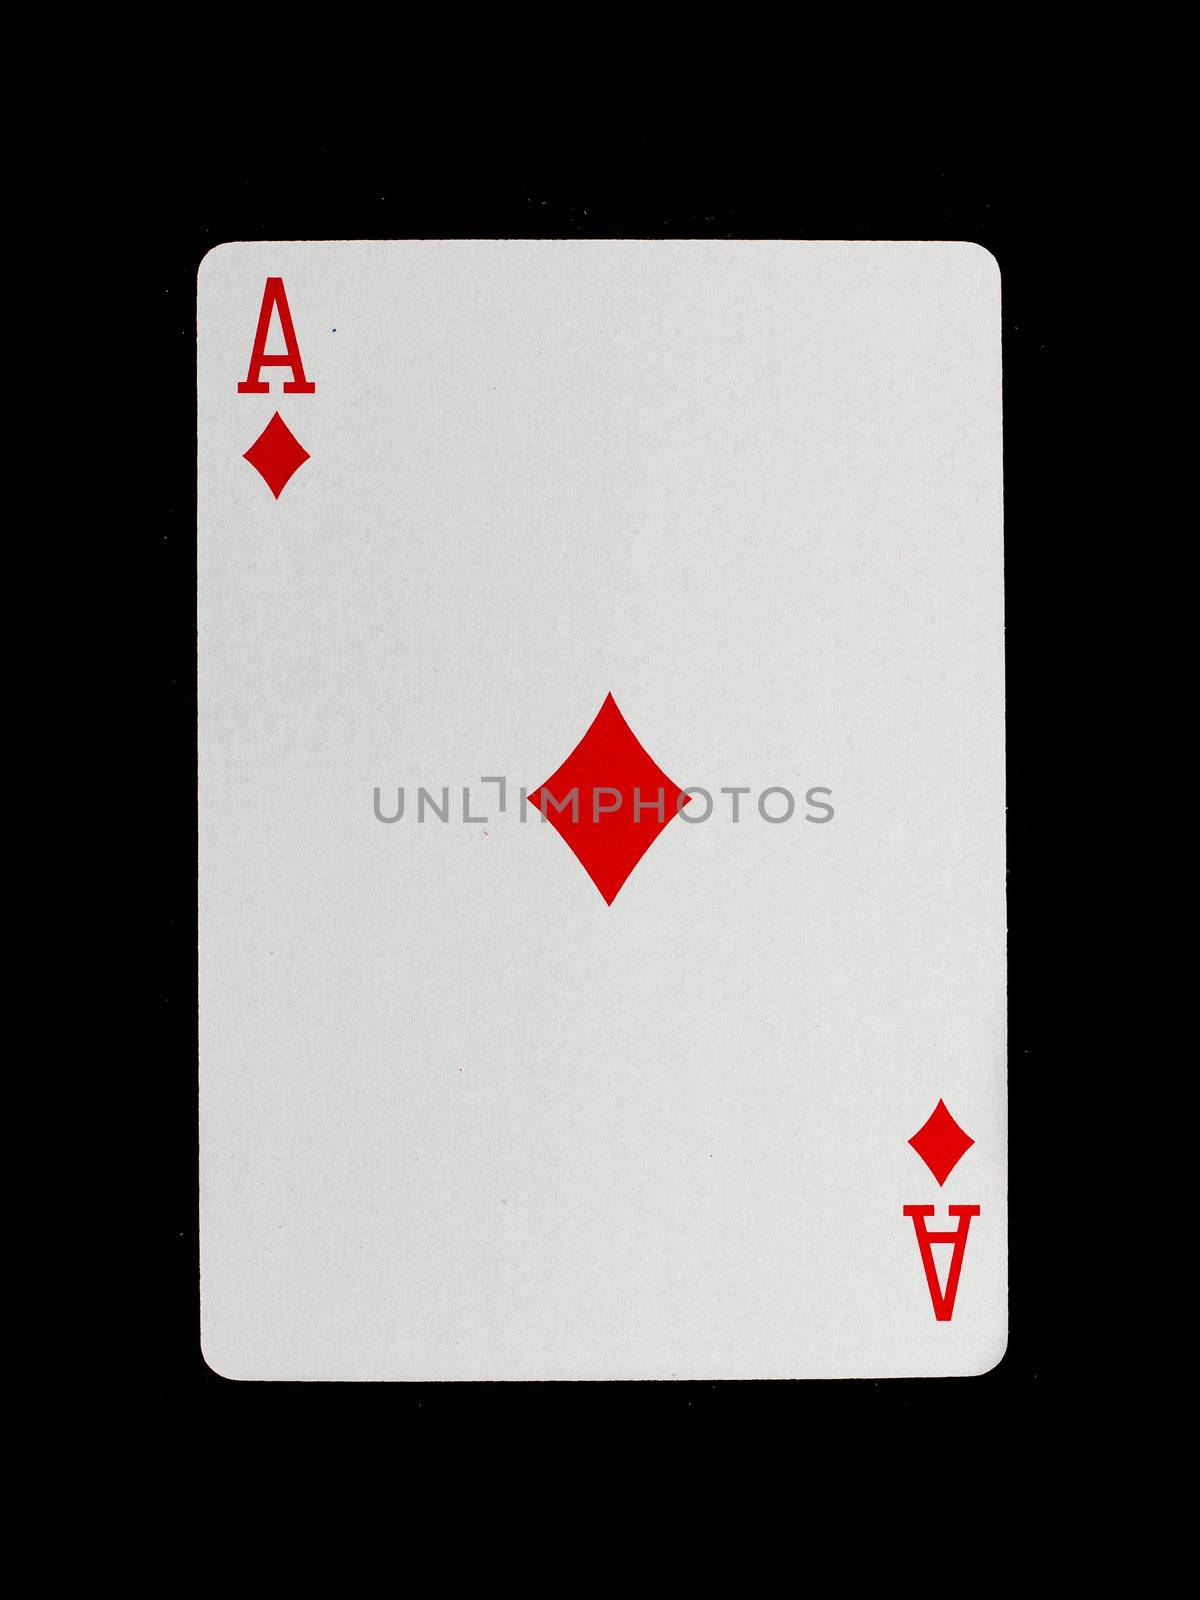 Old playing card (ace) isolated on a black background